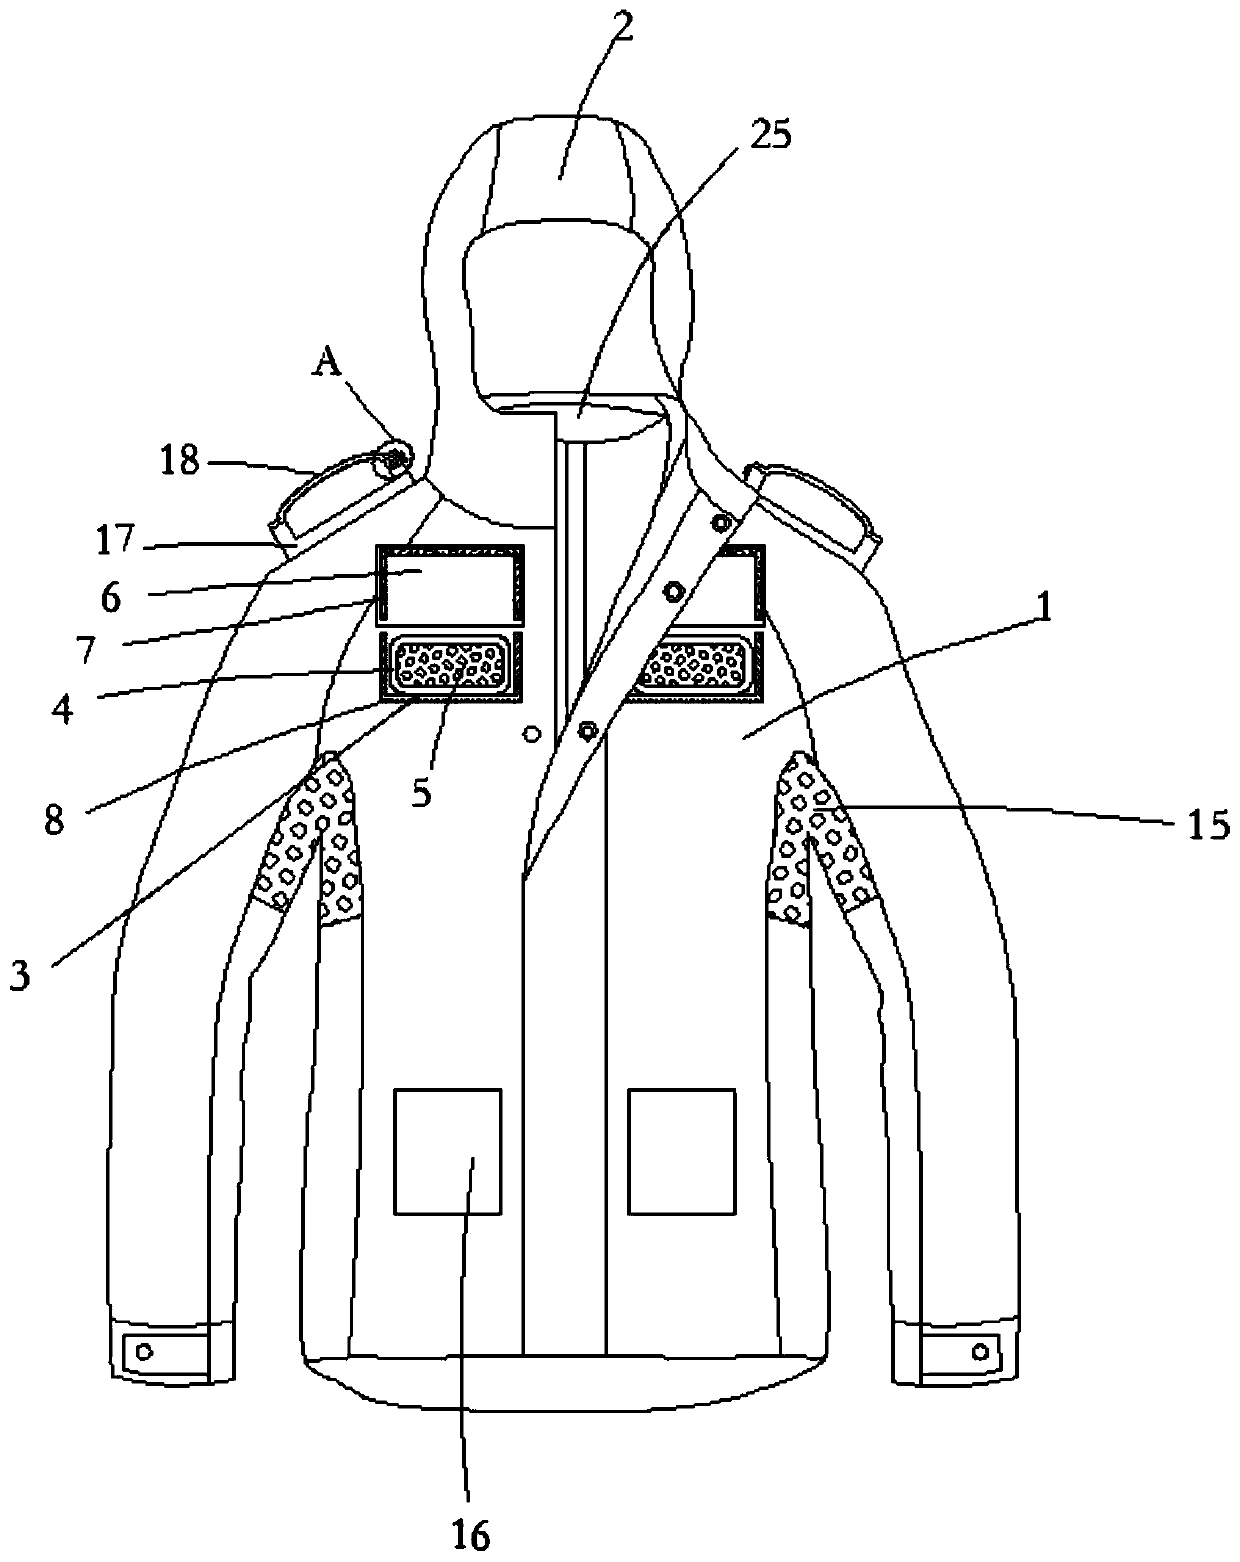 Man jacket with better air permeability